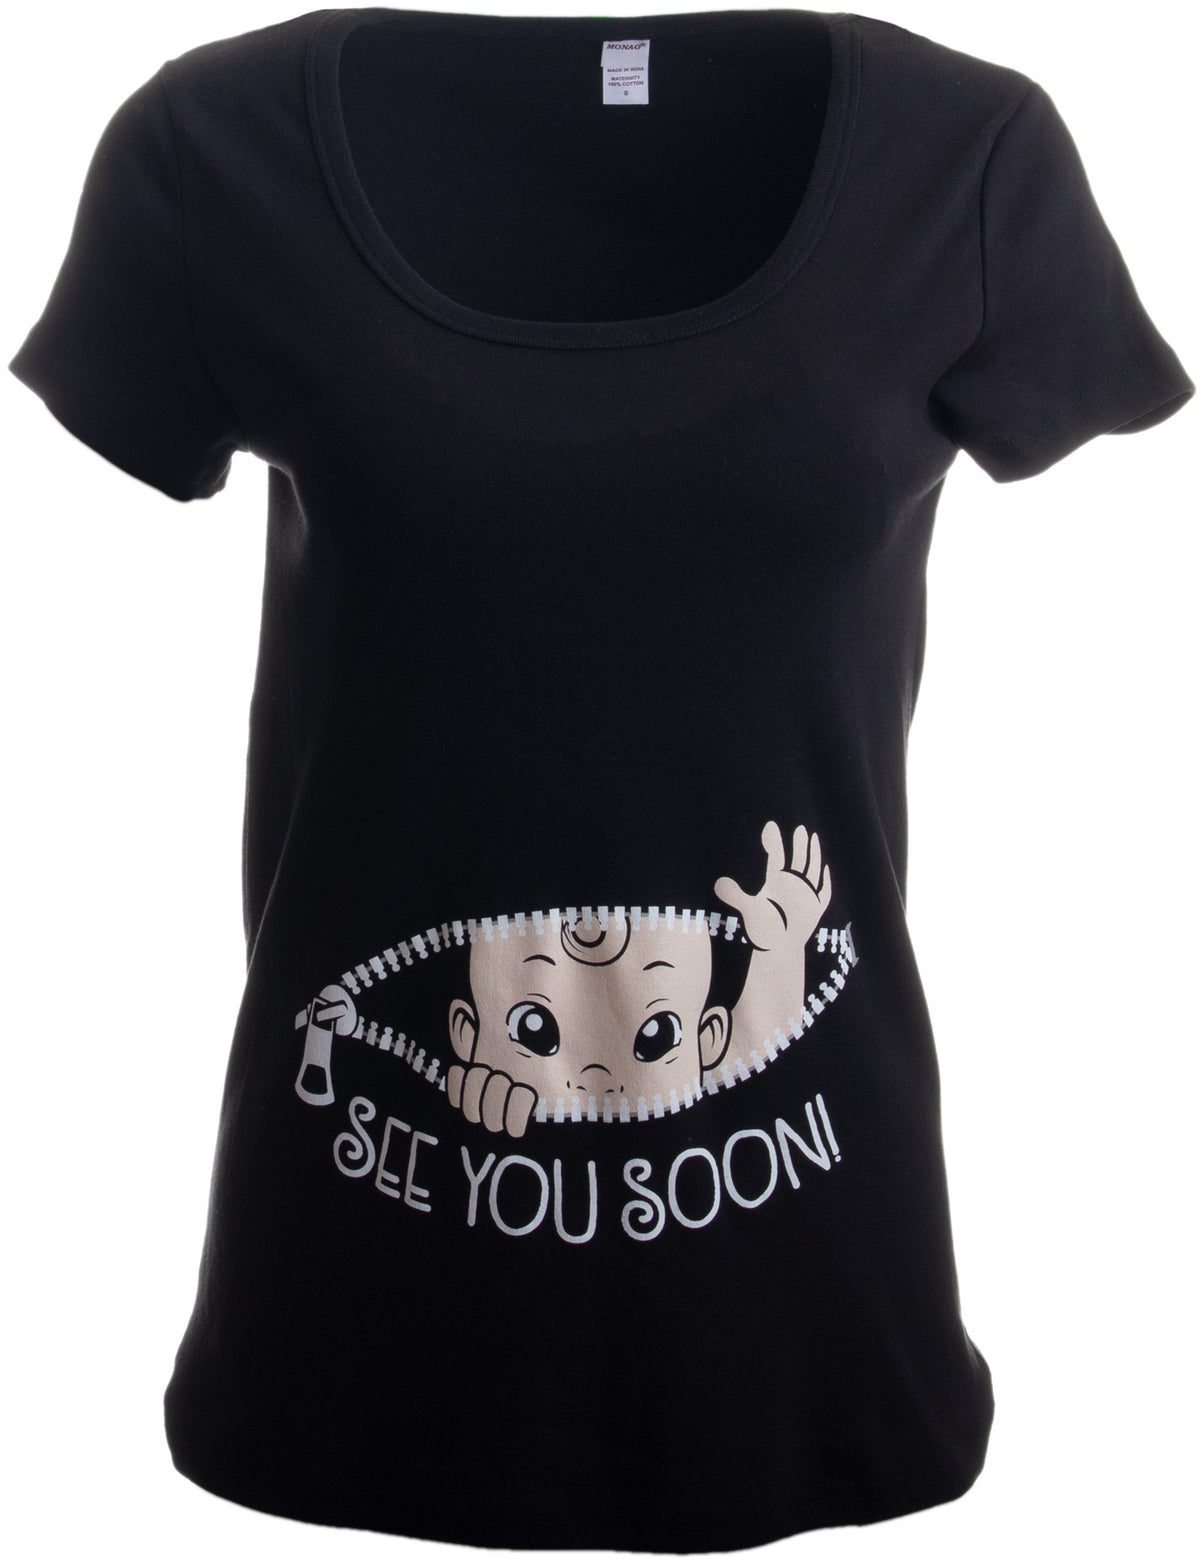 "See You Soon!" - Cute Funny Maternity Top, Pregnancy Baby Pregnant T-shirt - Women's